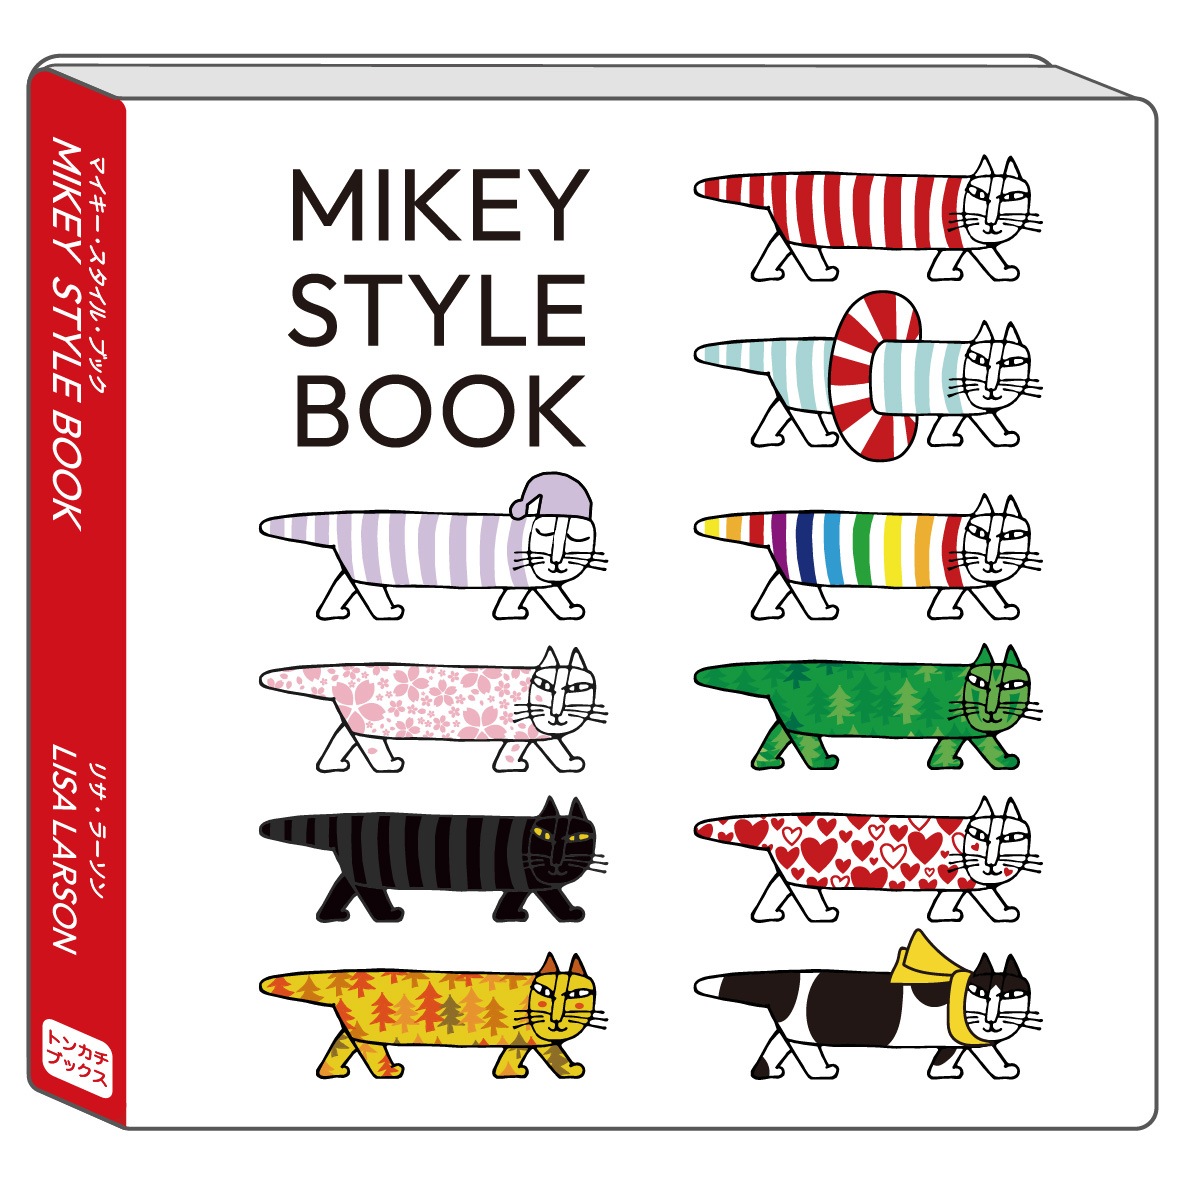 MIKEY STYLE BOOK